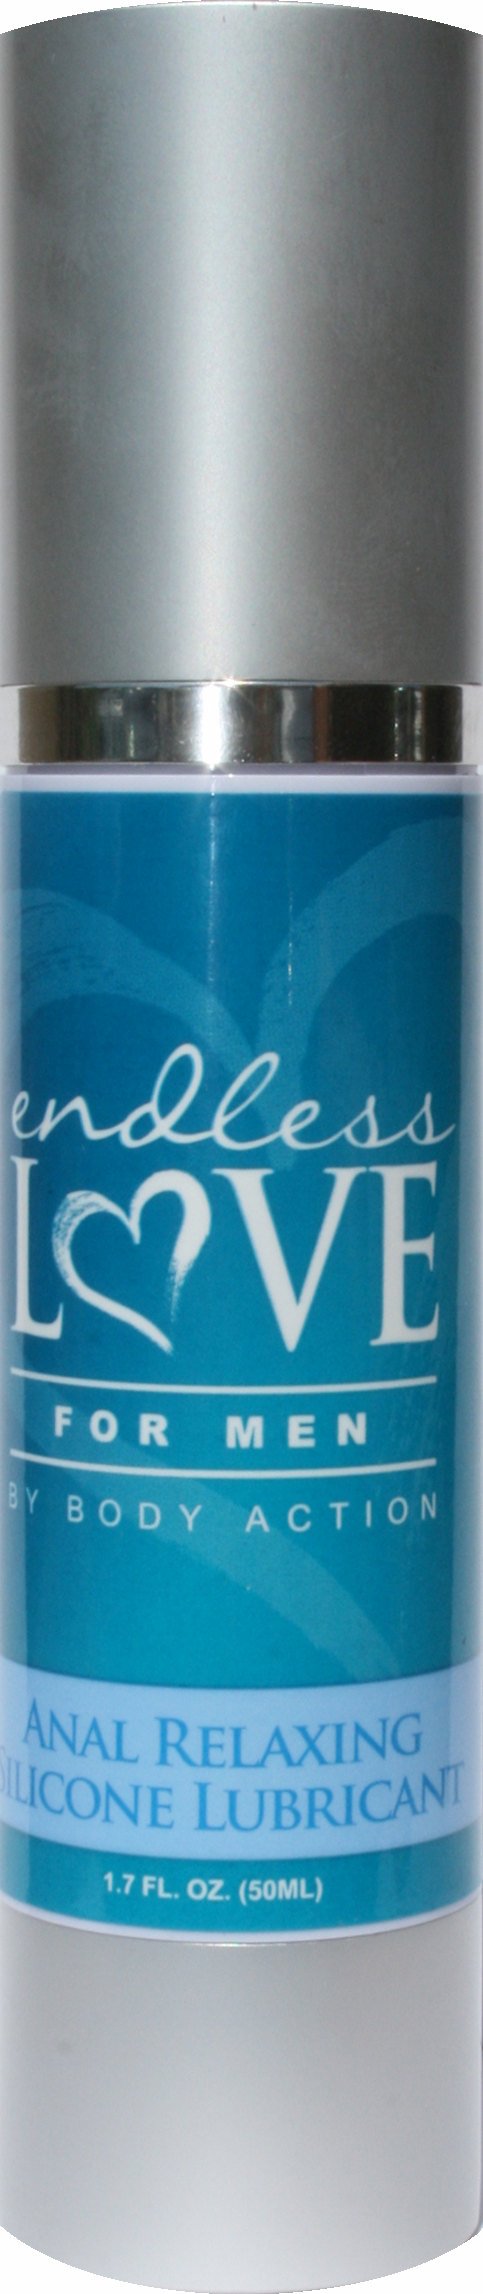 ENDLESS LOVE FOR MEN ANAL RELAXING SILICONE LUBRICANT 1.7 OZ